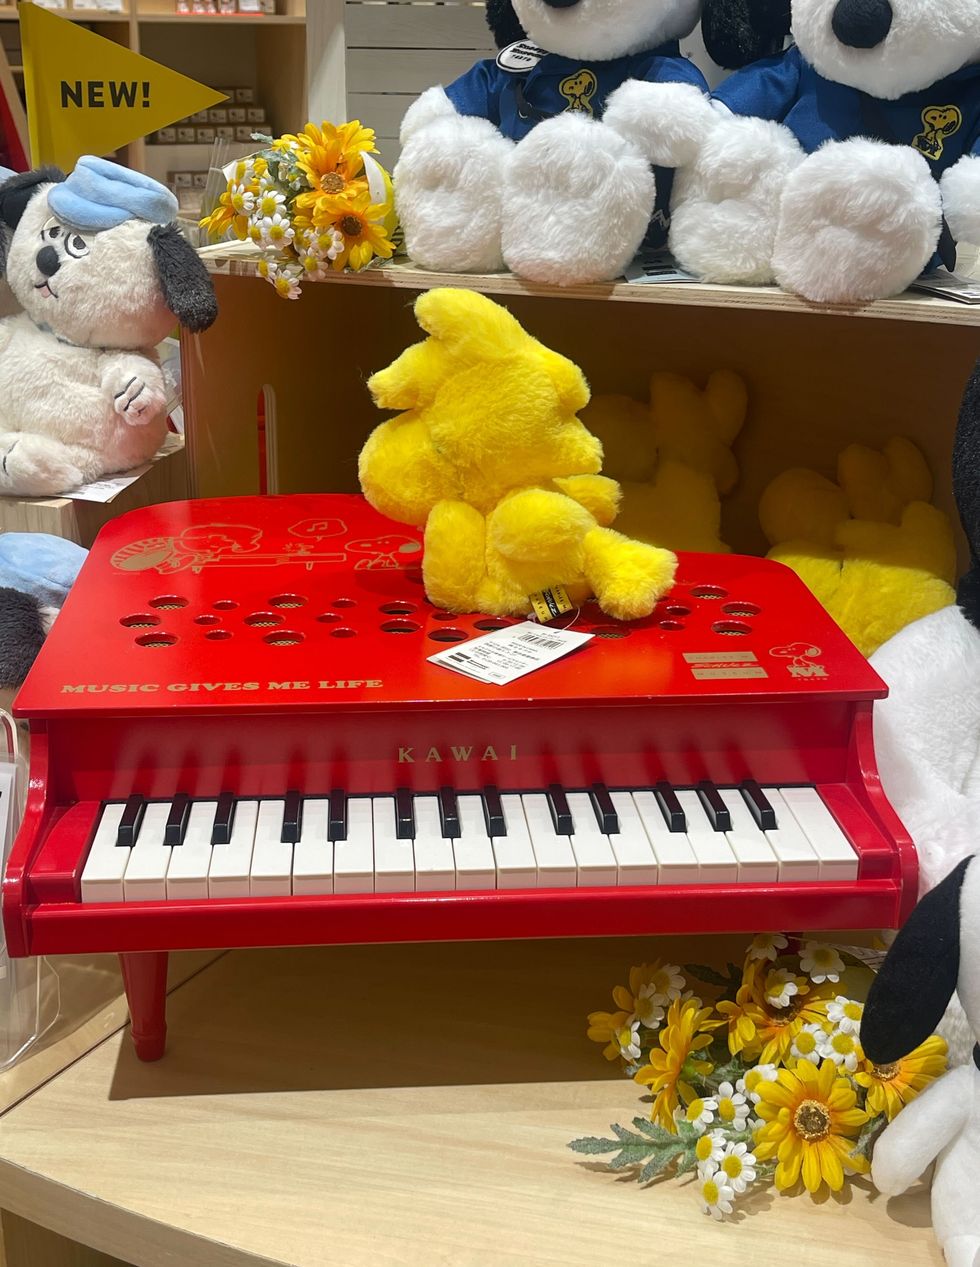 a group of stuffed animals sit on top of a piano